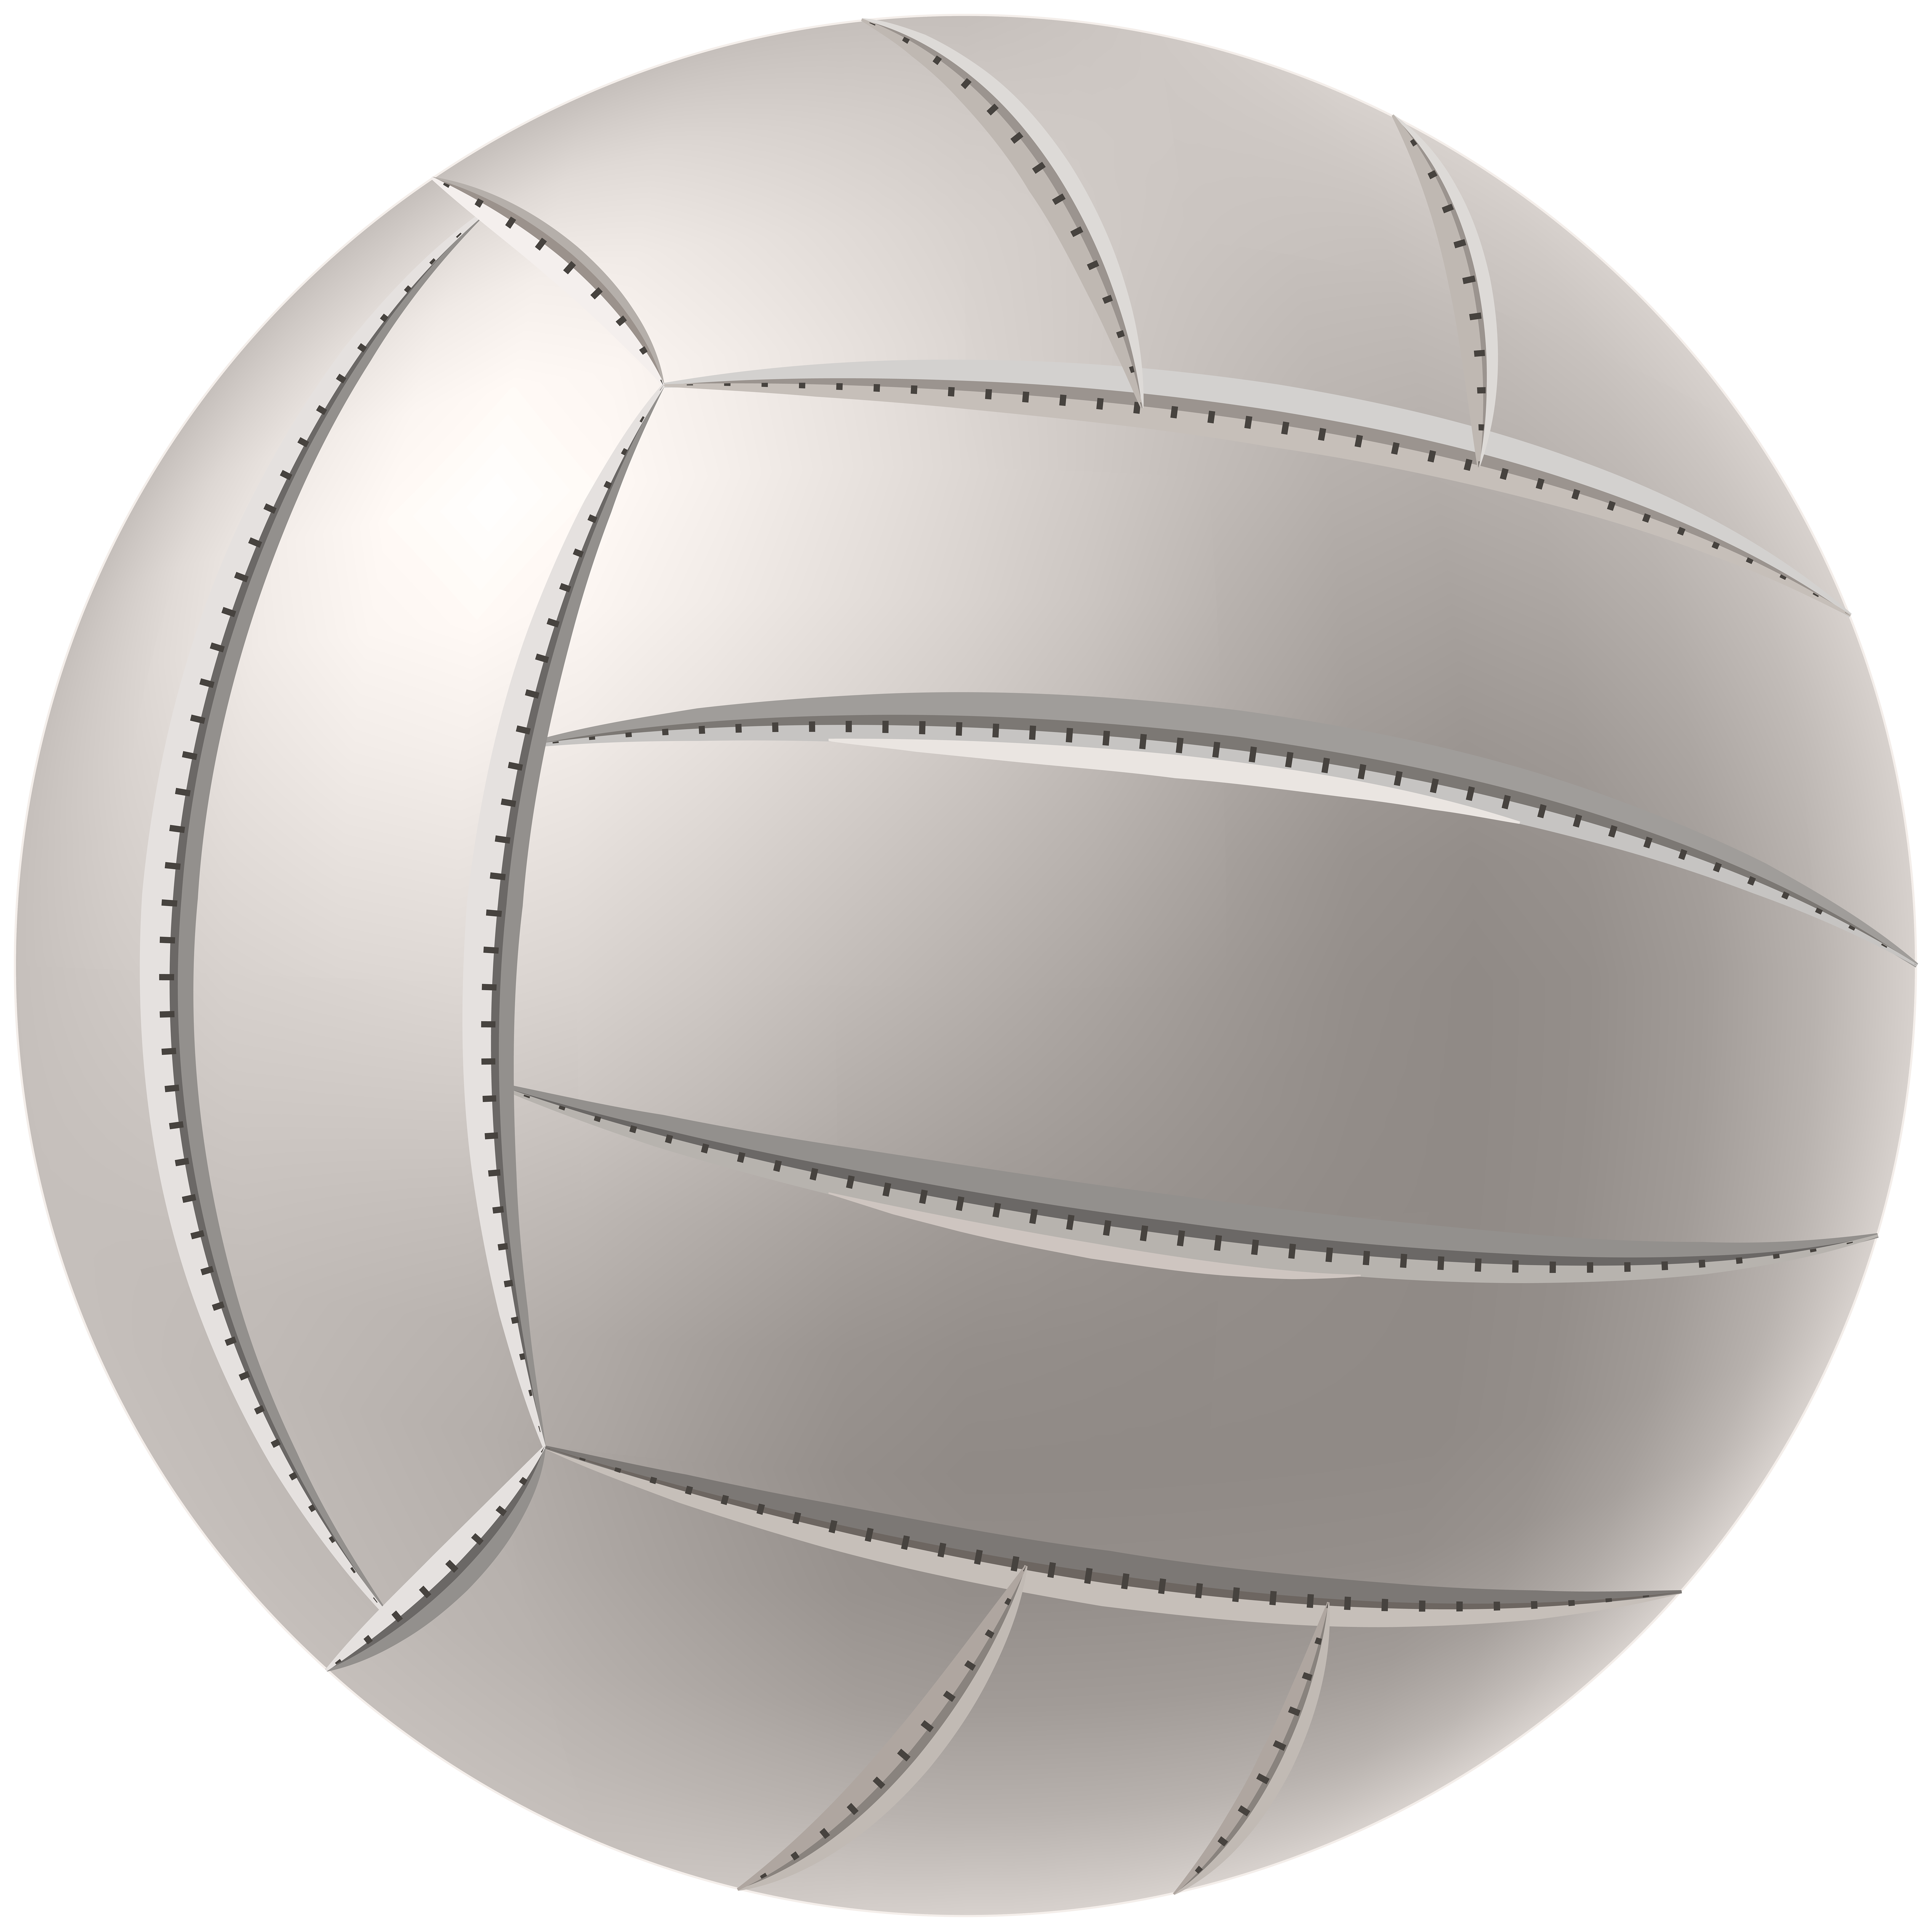 https://gallery.yopriceville.com/var/albums/Free-Clipart-Pictures/Sport-PNG/Volleyball_PNG_Clip_Art_Image.png?m=1465440901